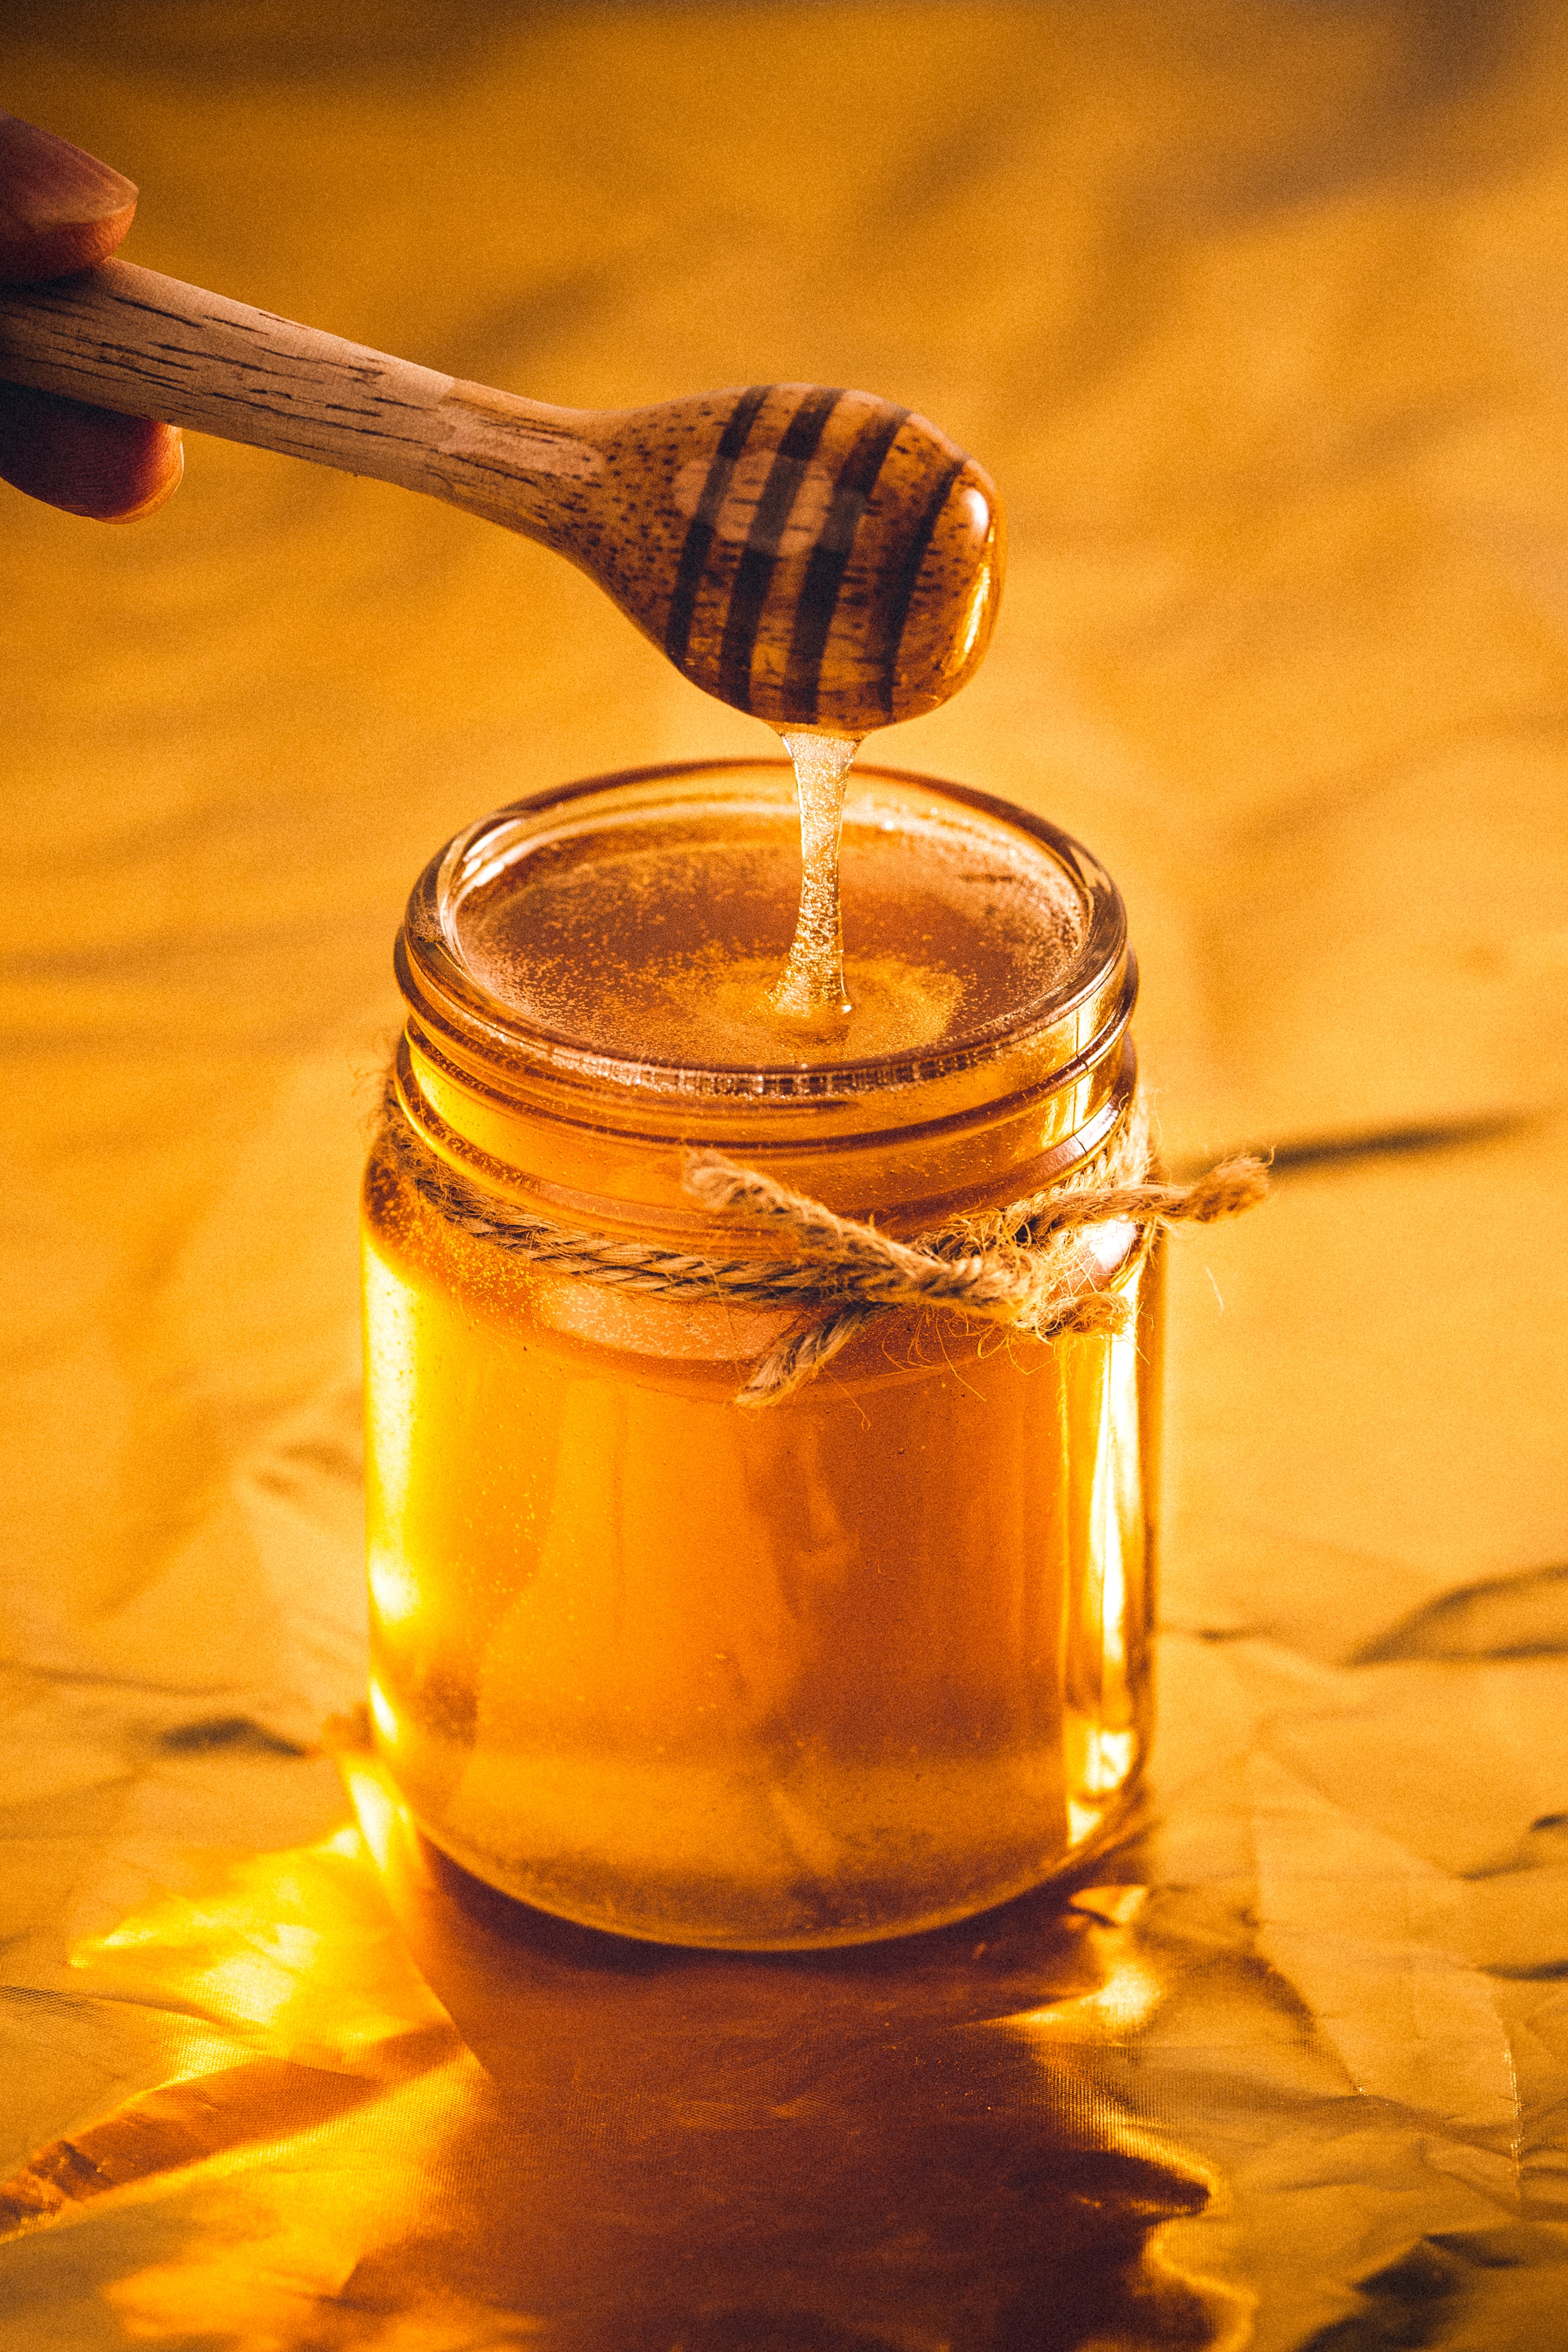 When the Kiwi law played the Aussie tune - The tale of Manuka Honey